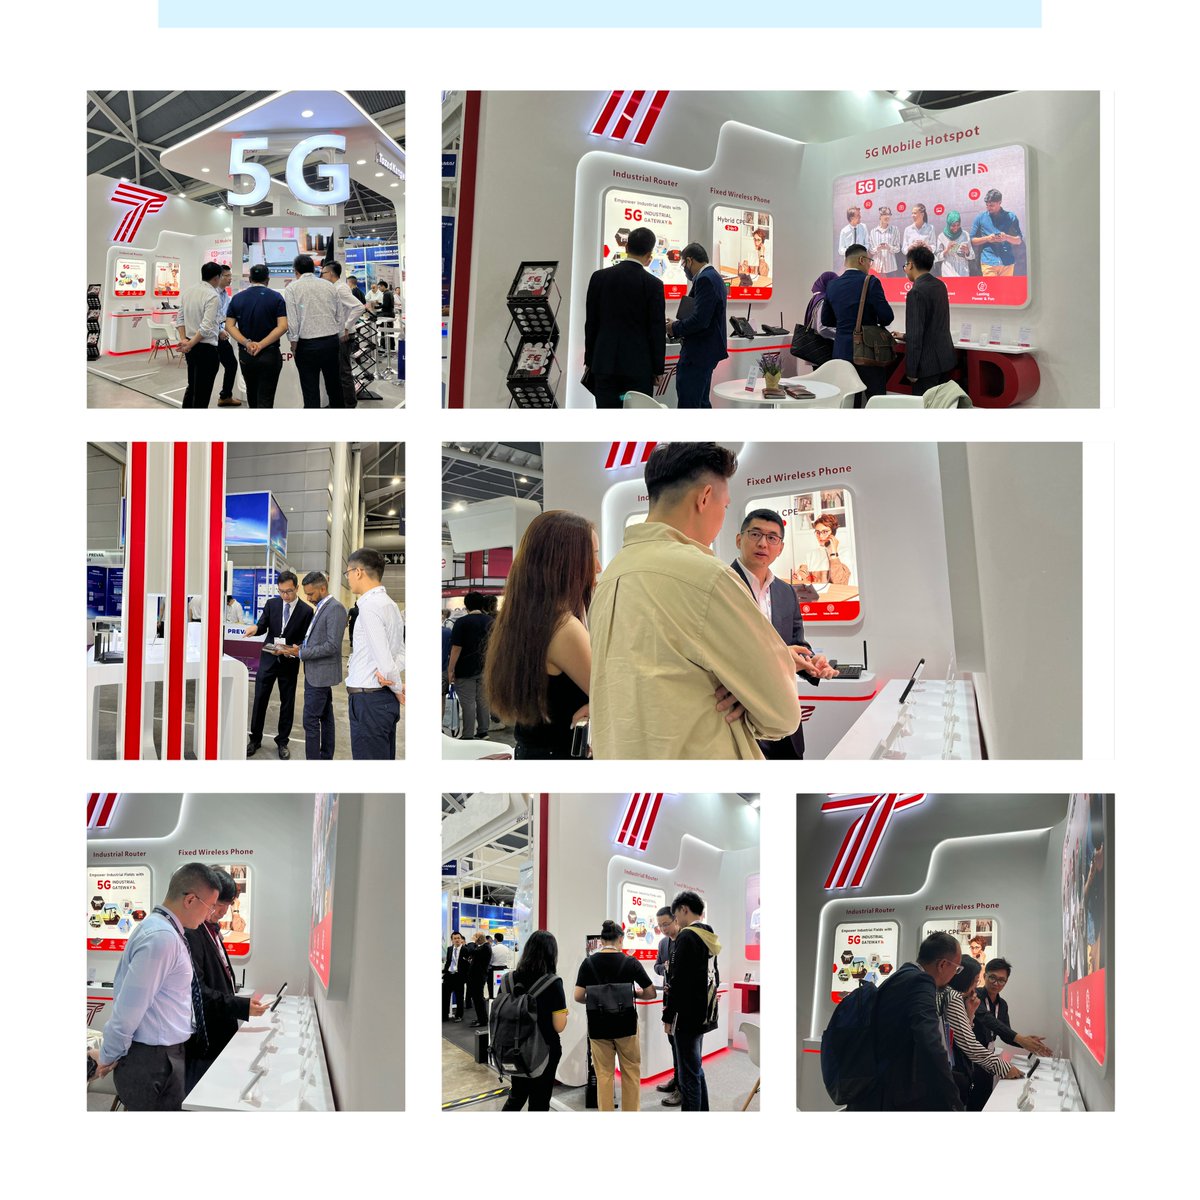 #TozedKangweiIntelligentTechnology sincerely appreciates all the visitors at Singapore Expo. ❤

Let's keep in touch and connect to better future!
------
#Tozed #CommunicAsia #ATxSG #Connecttobetterfuture 
#5G #4G #connection #connectivity #Internet